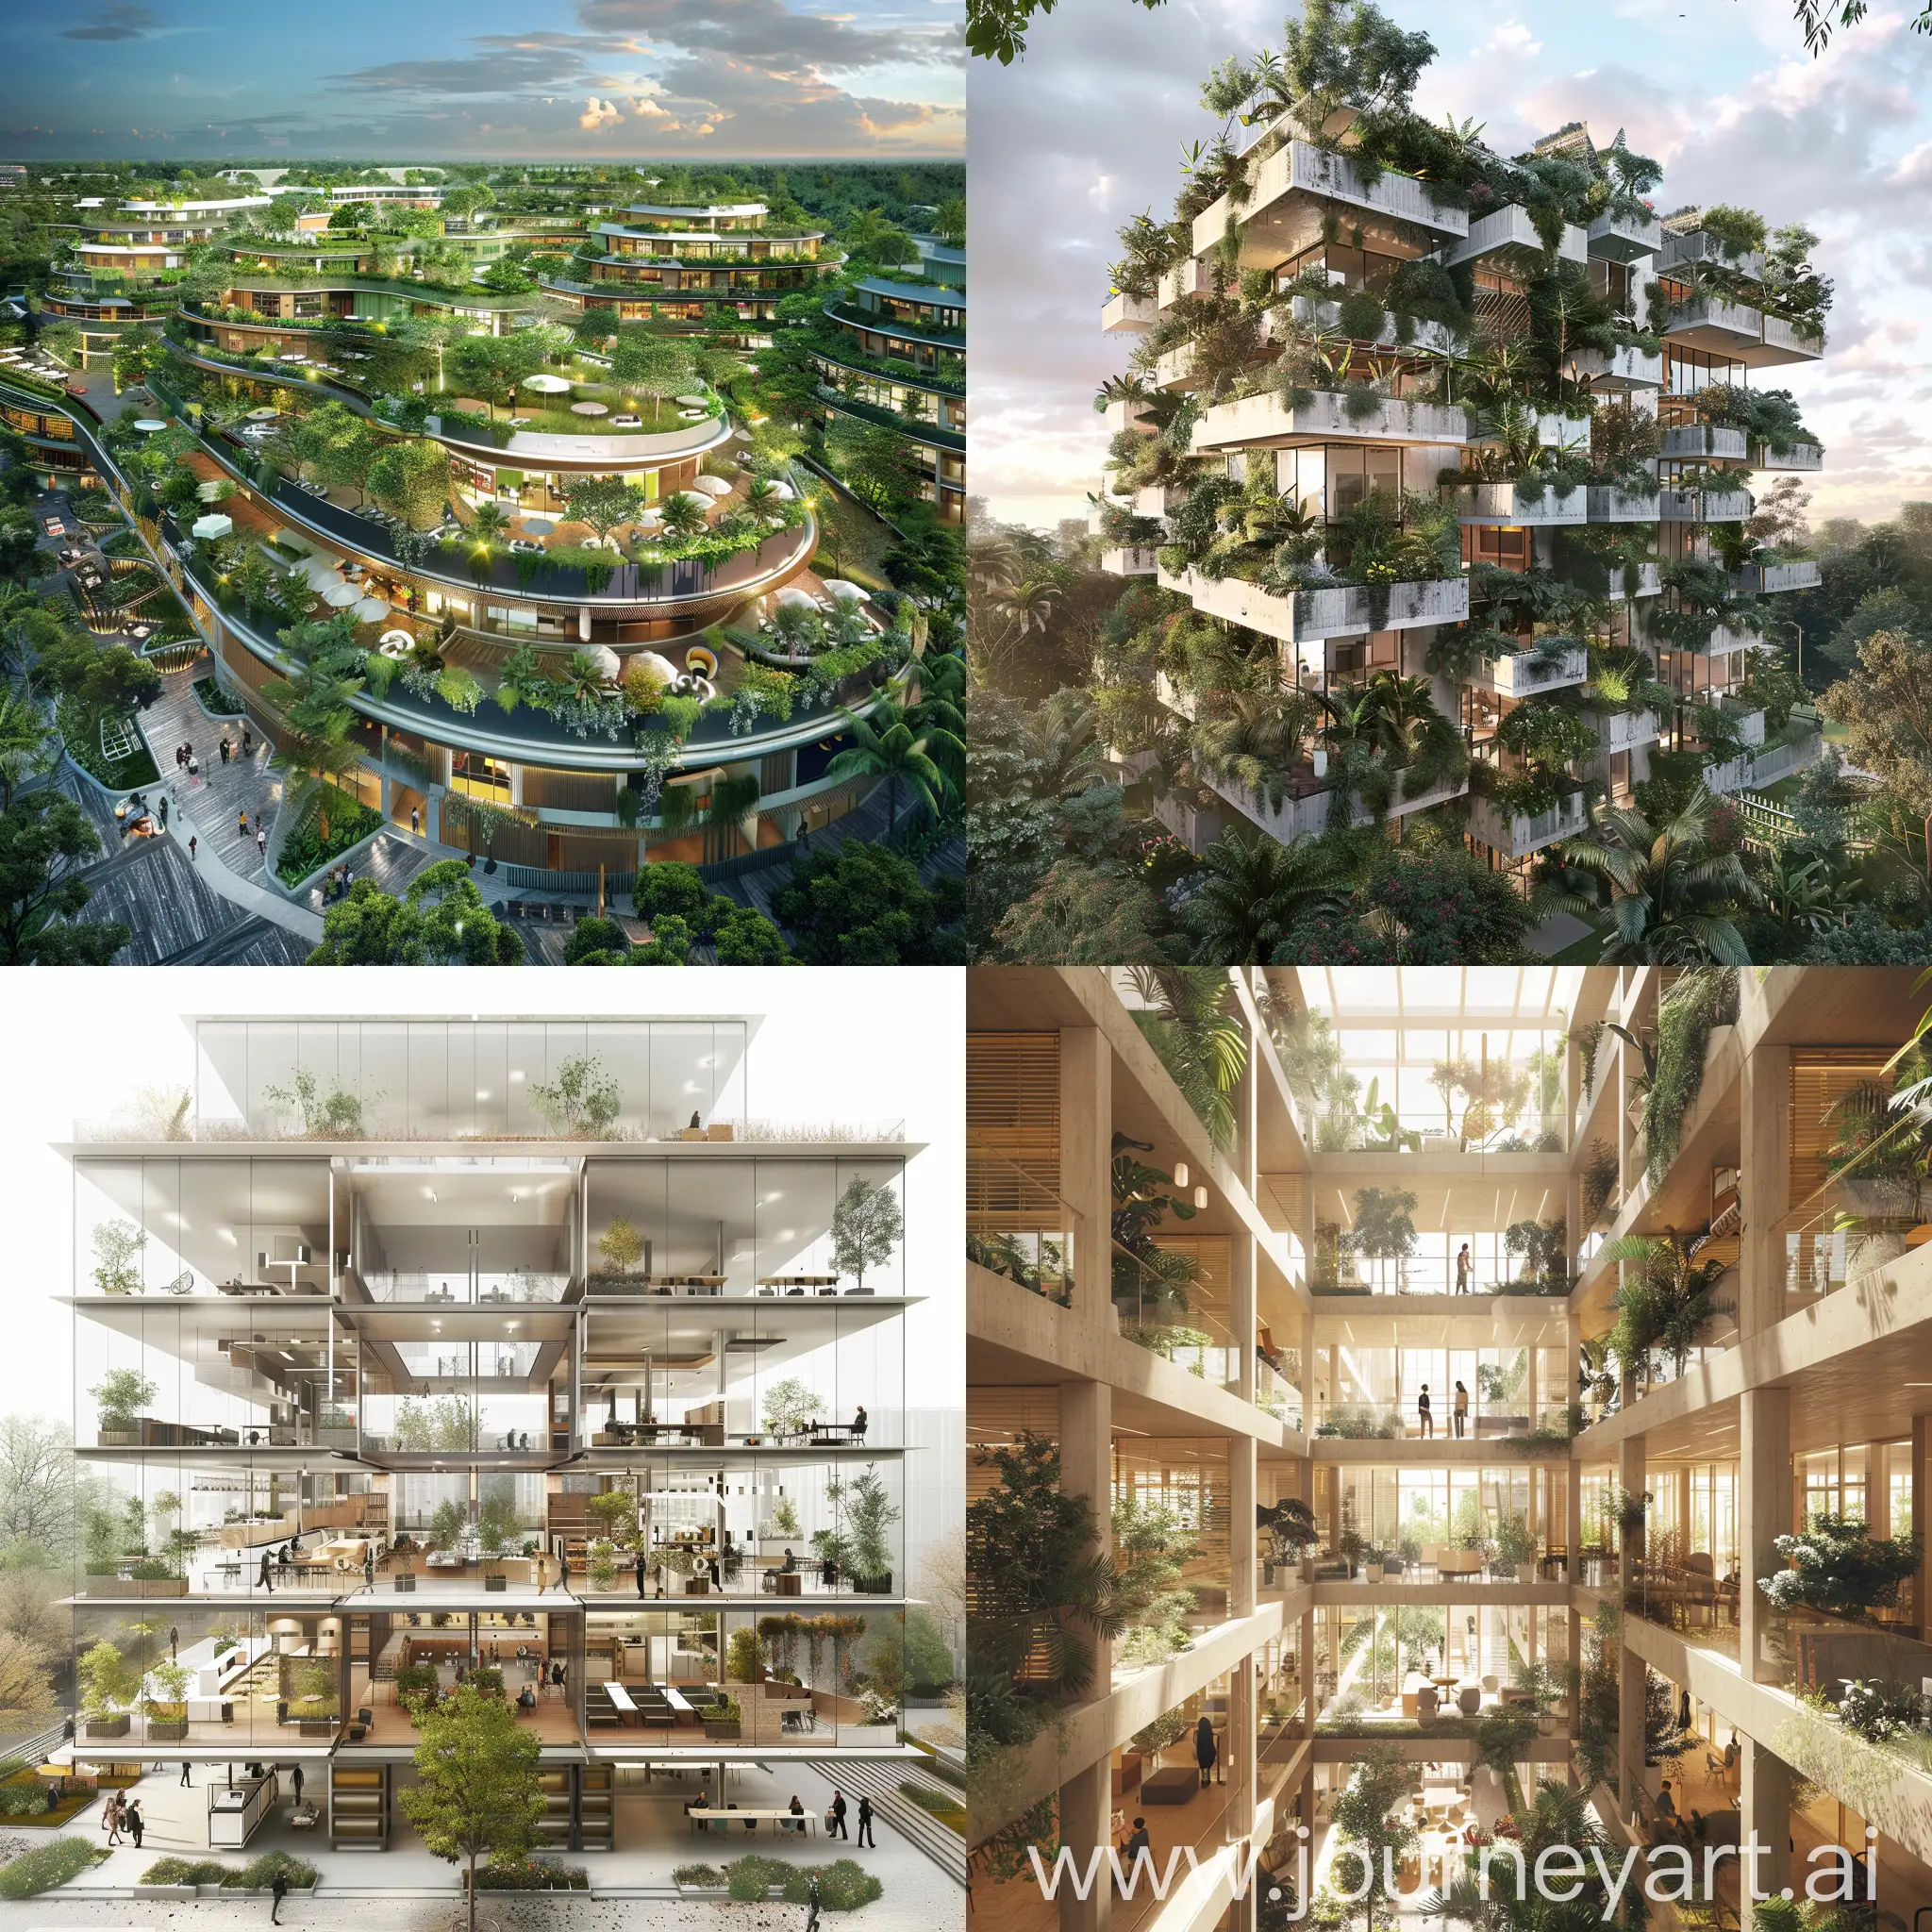 Commercial-MixedUse-Building-Surrounded-by-Lush-Greenery